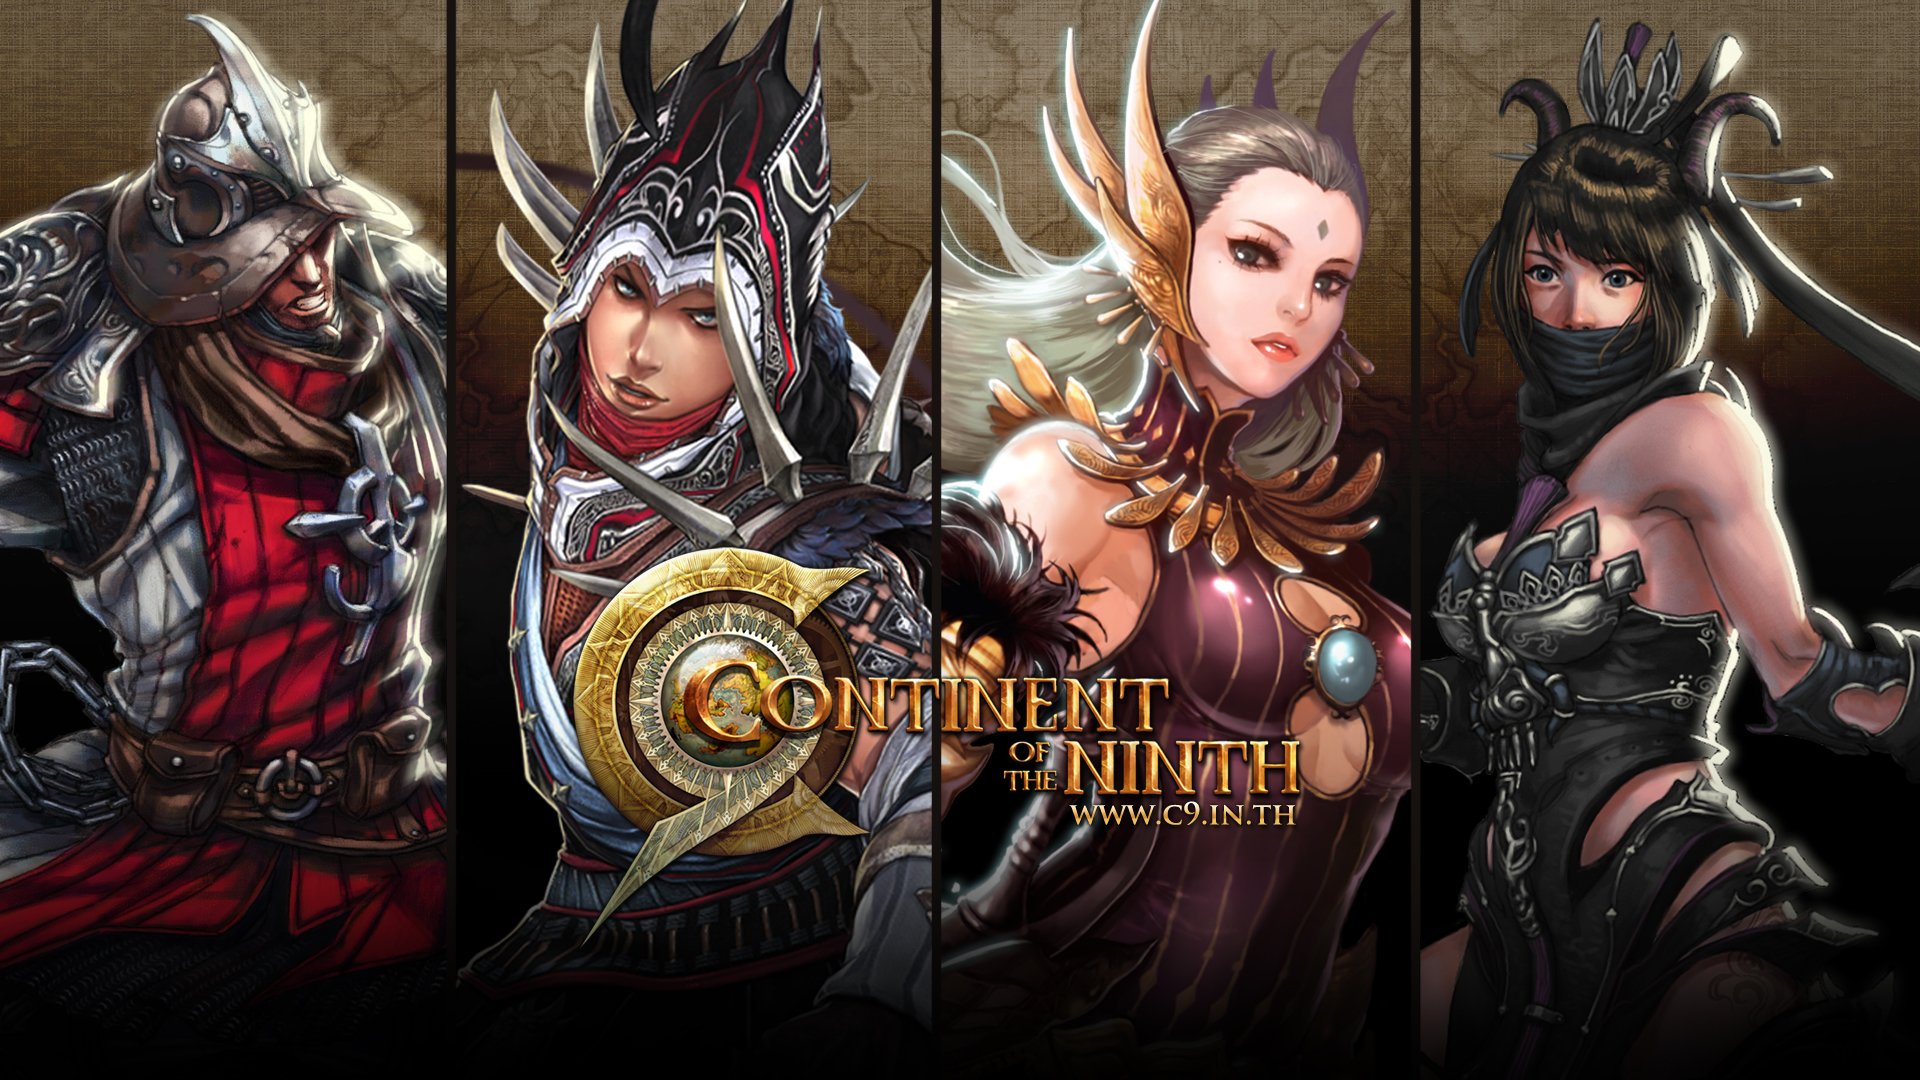 c9, Continent ninth seal, Action, Mmo, Online, Fantasy, Warrior, Continent, Ninth, Seal,  47 Wallpaper